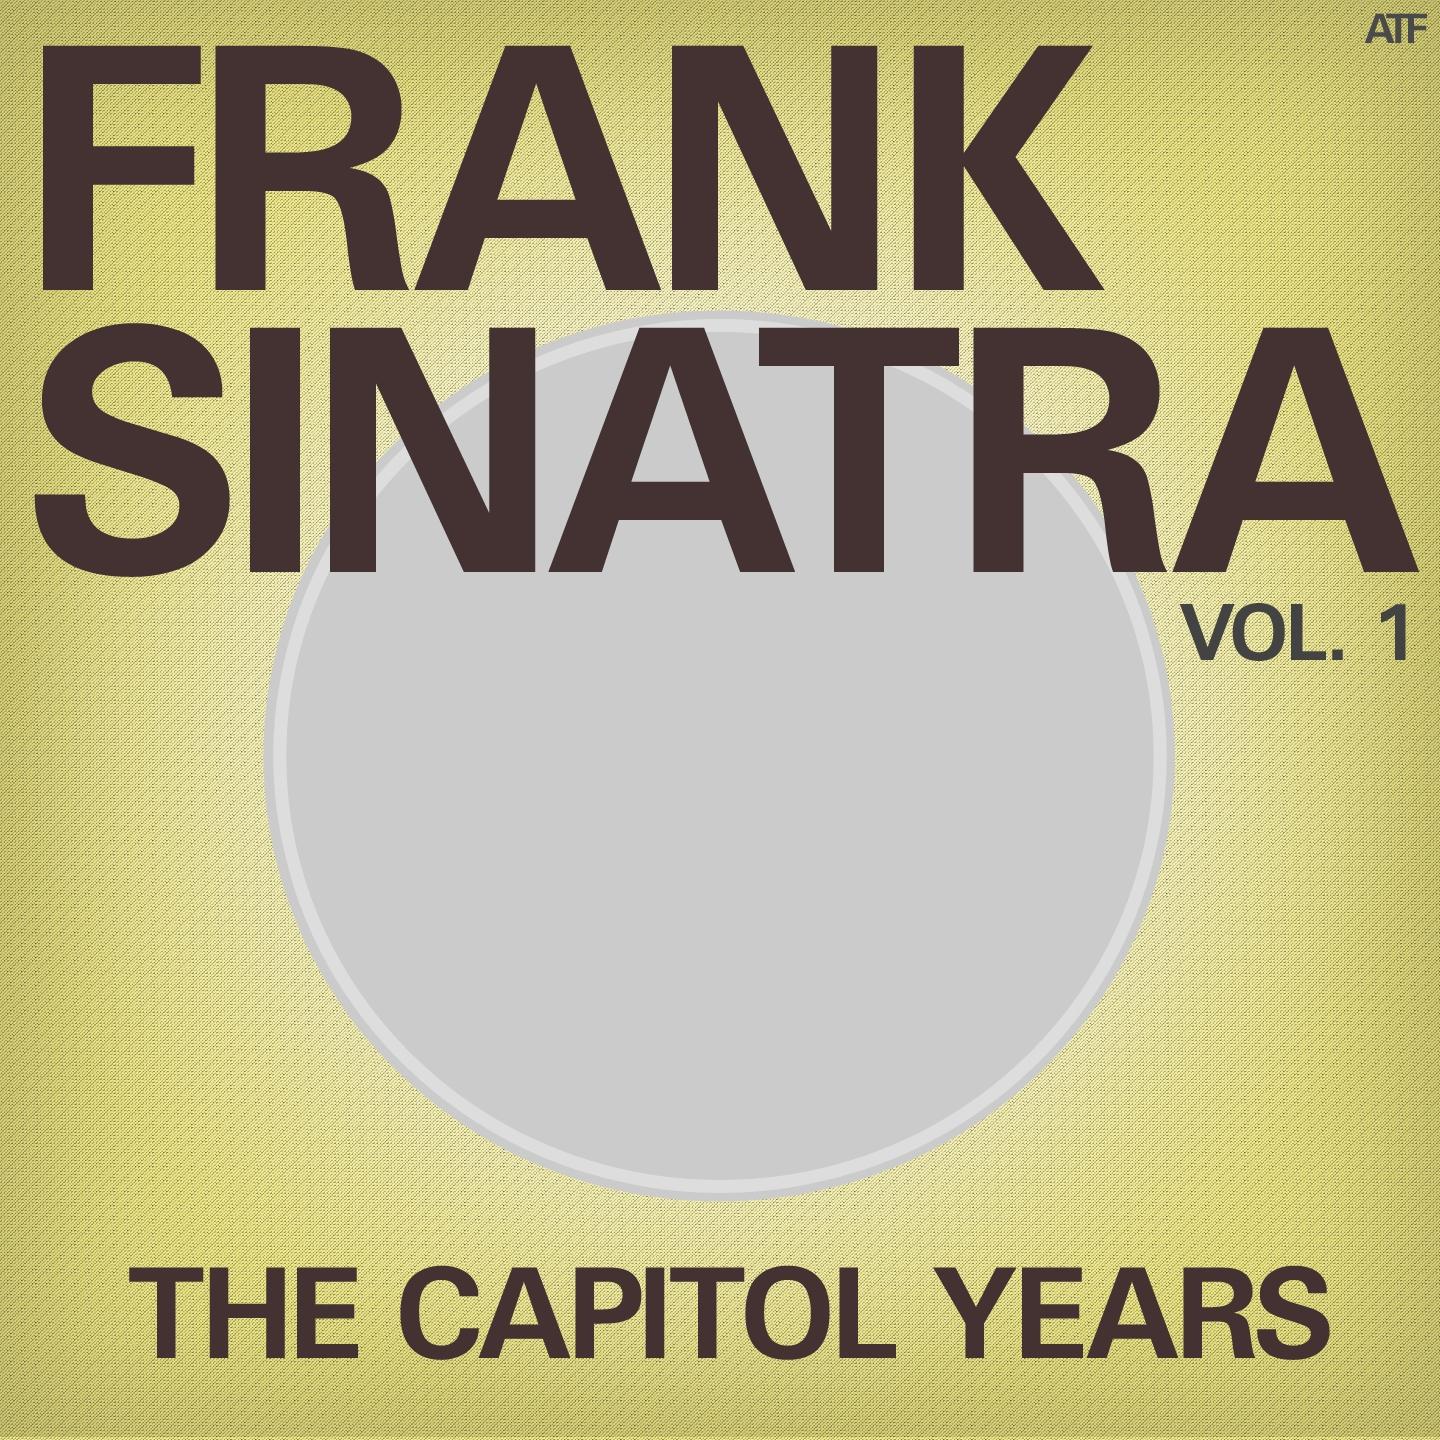 The Capitol Years, Vol. 1